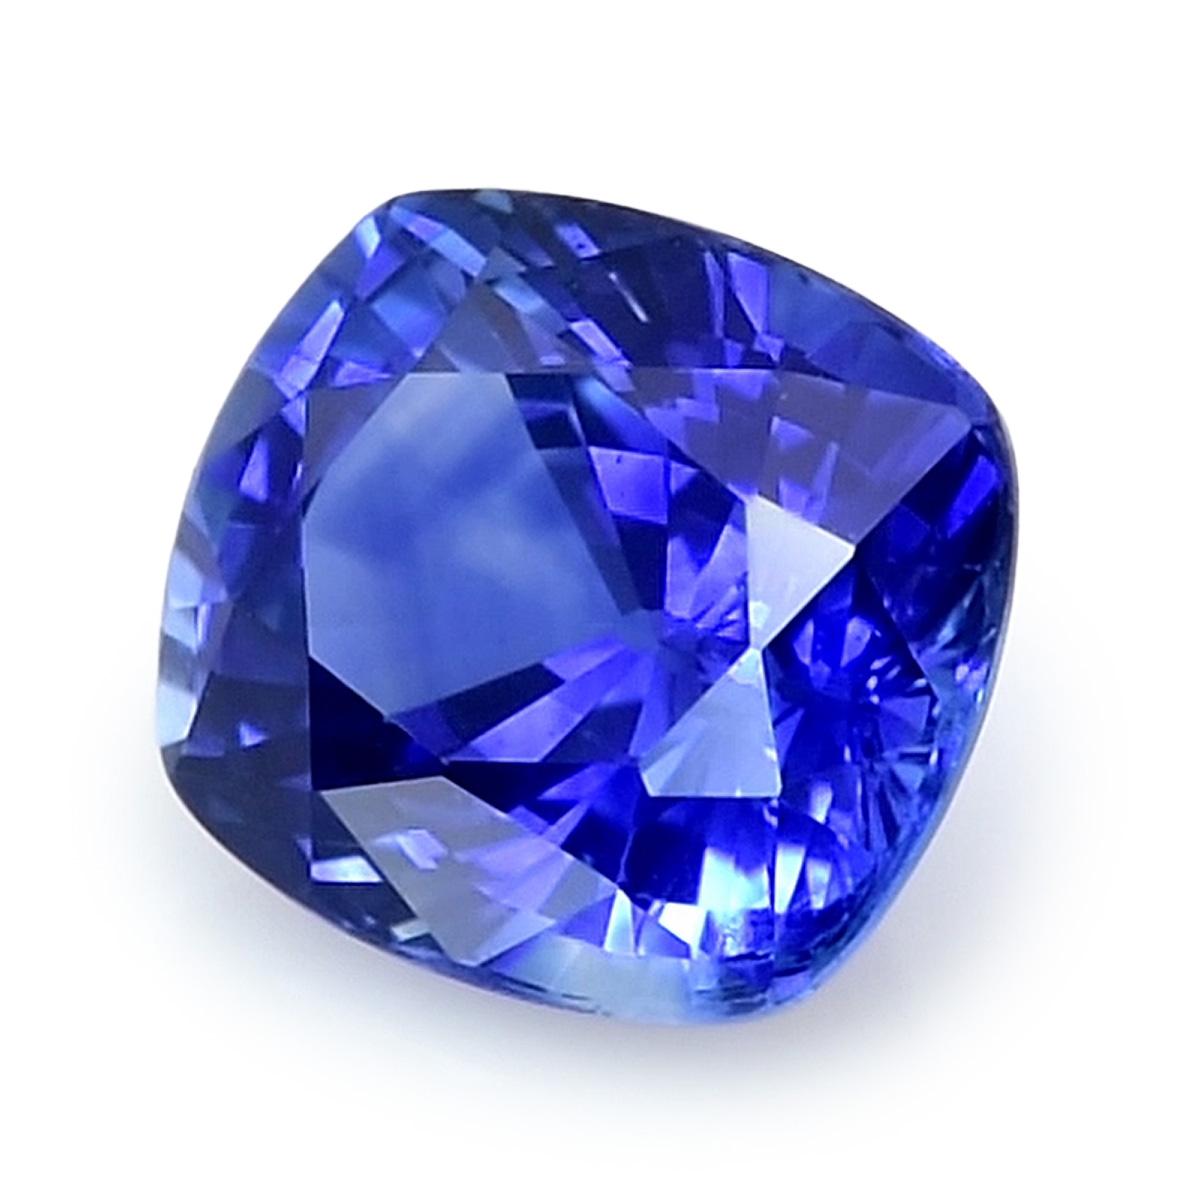 Mixed Cut GIA Certified  1.81 Carat Natural Blue Sapphire For Sale